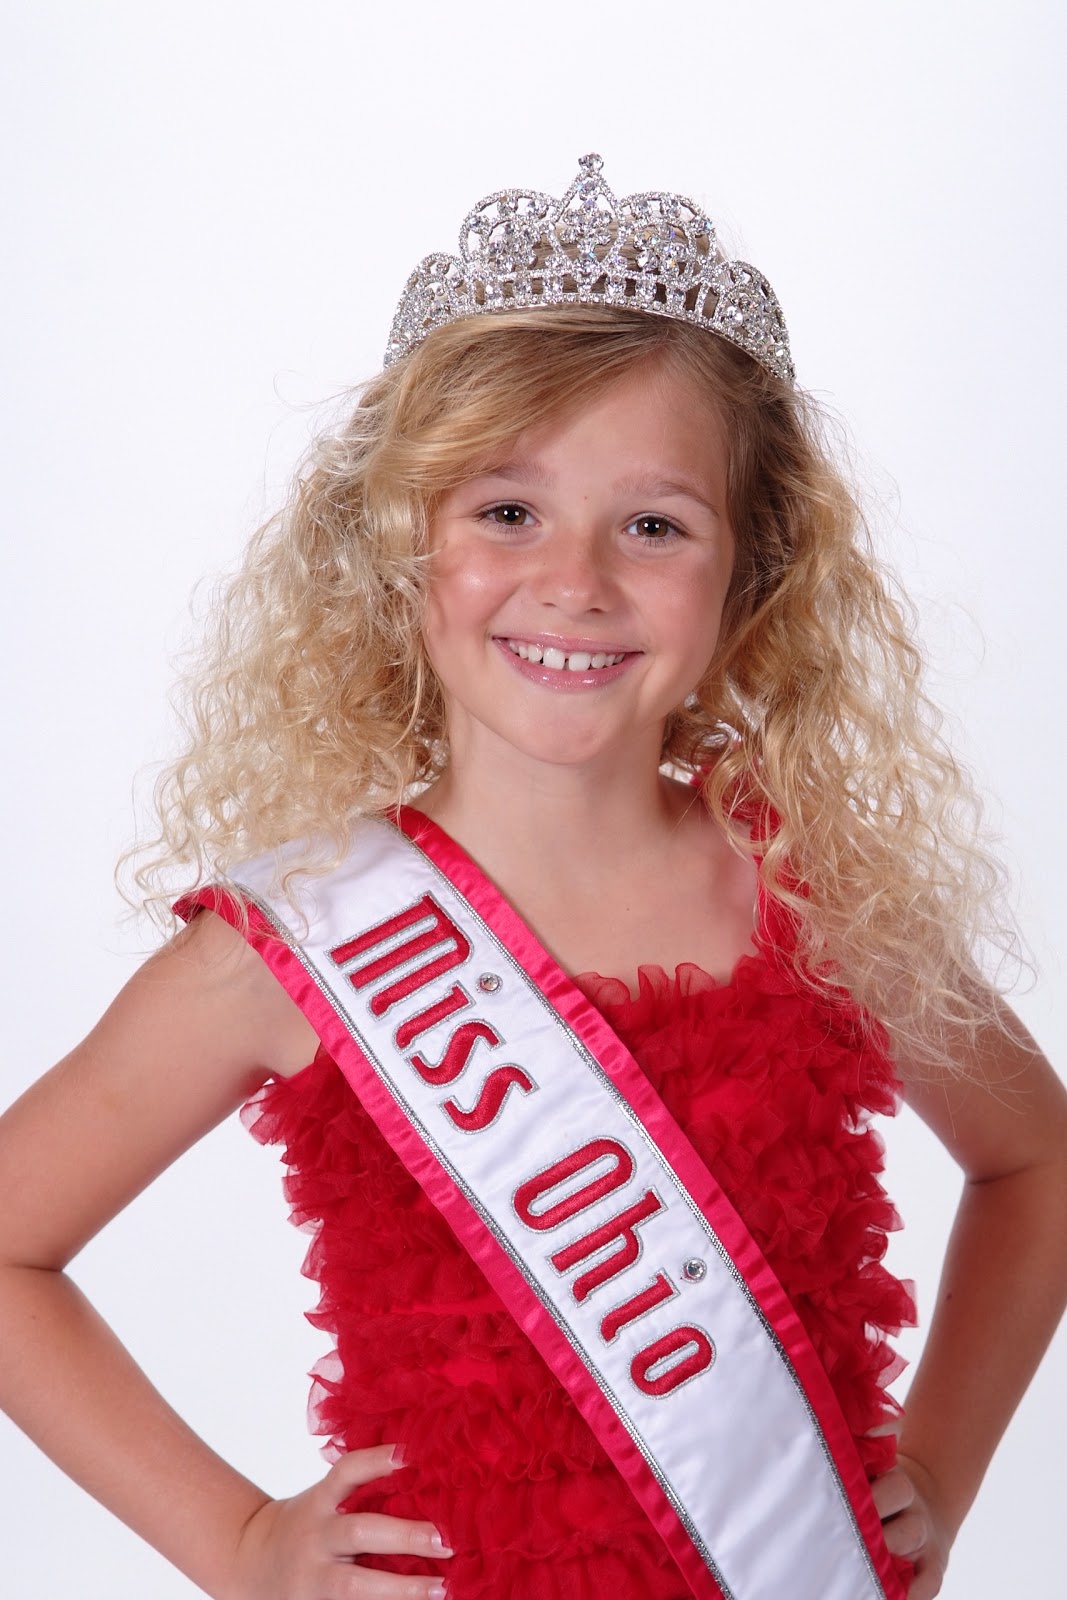 Miss District of Columbia United States: Meet Little Miss 